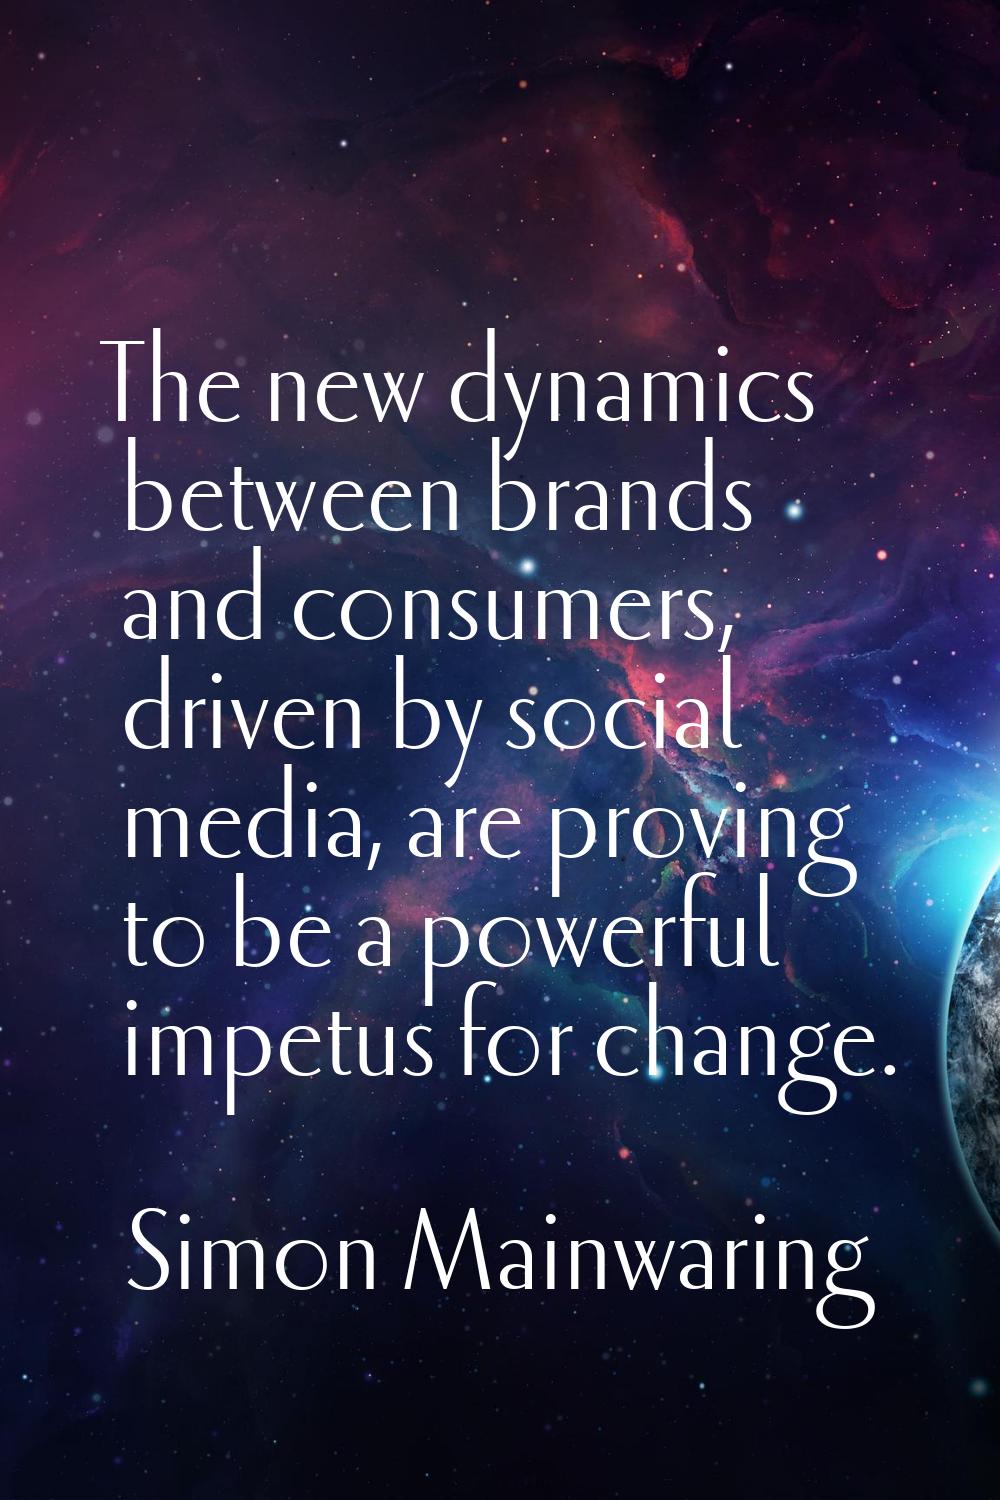 The new dynamics between brands and consumers, driven by social media, are proving to be a powerful